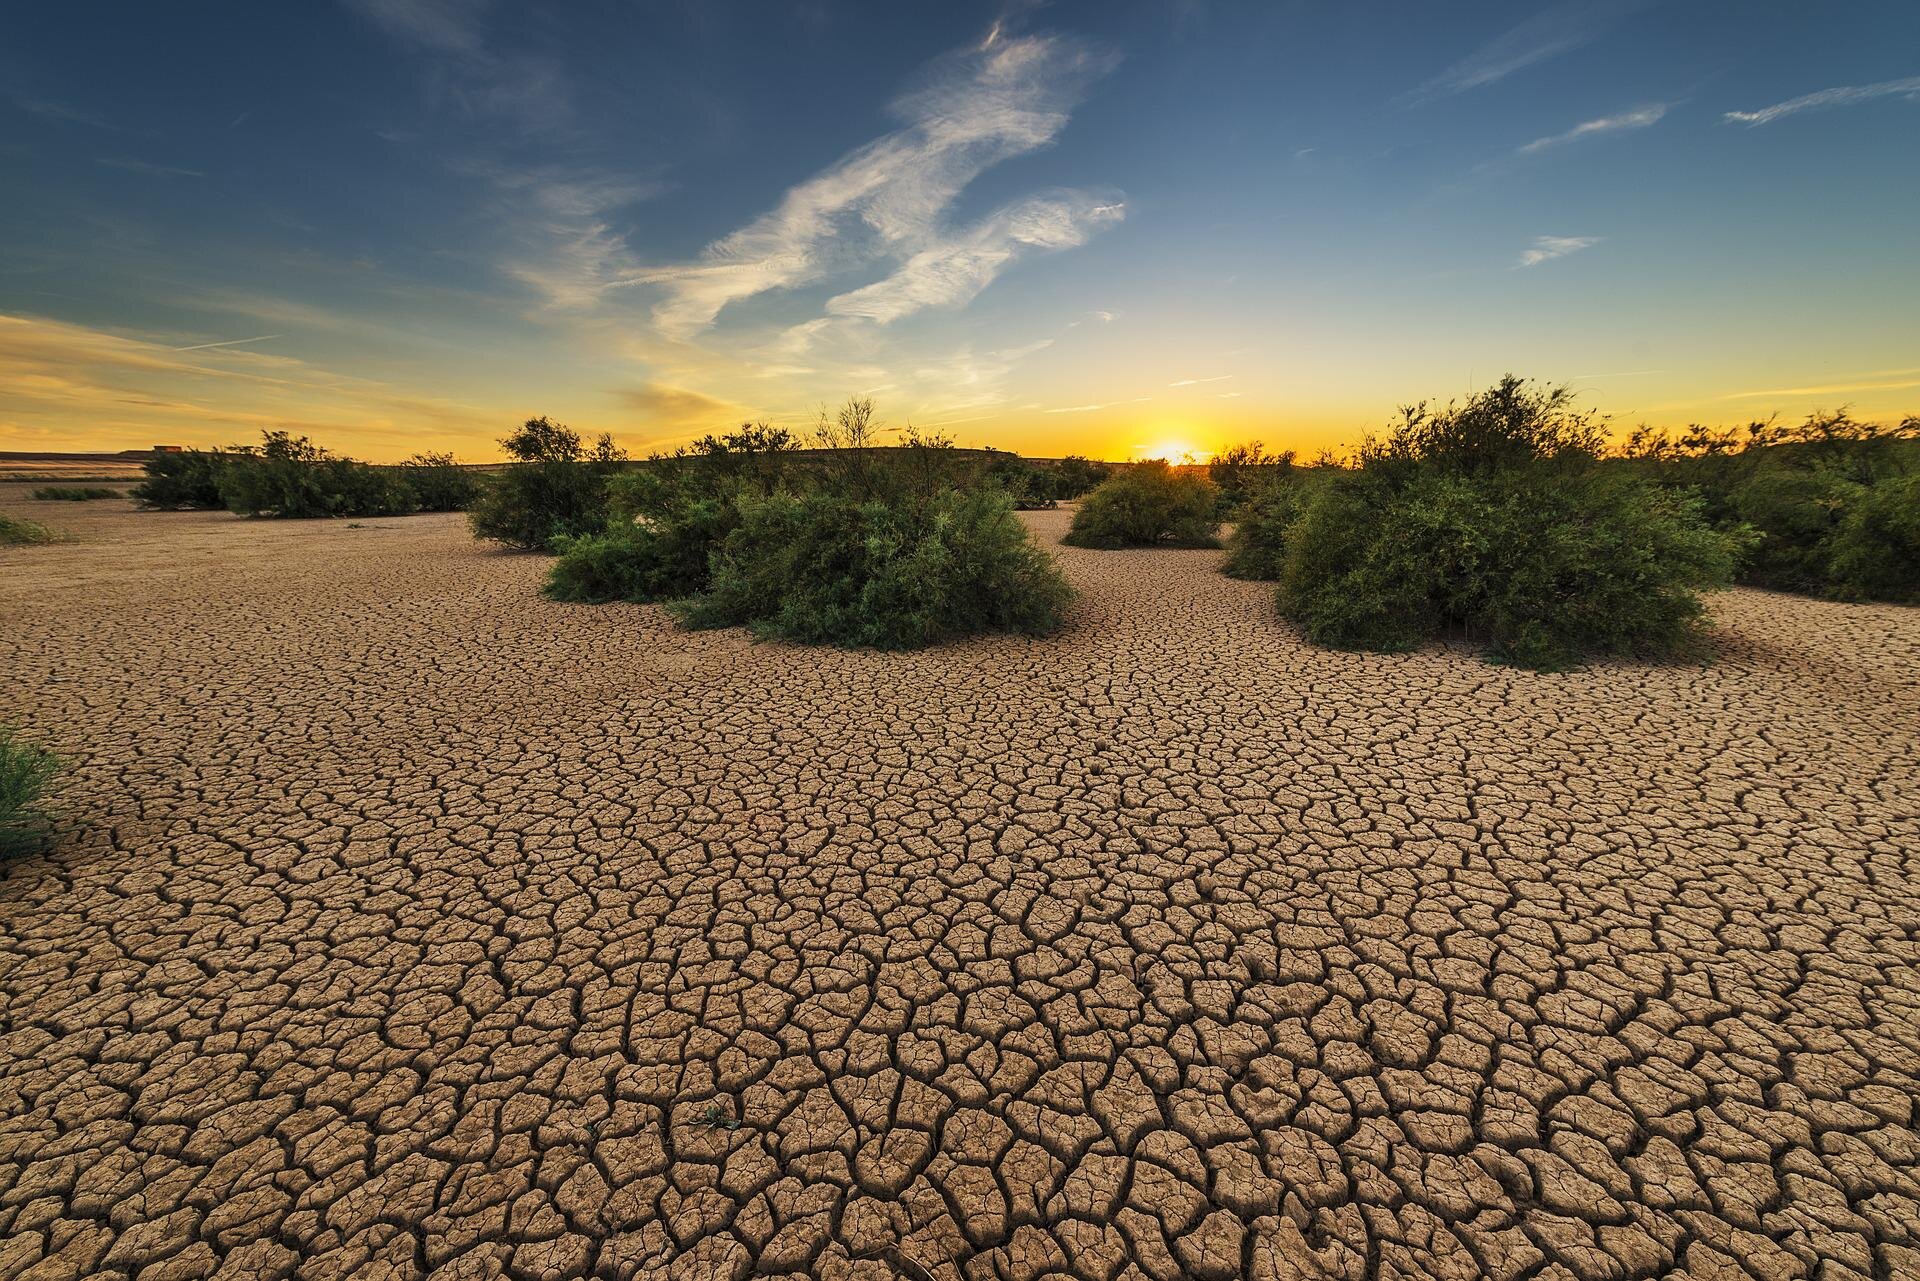 Climate change made summer drought 20 times more likely